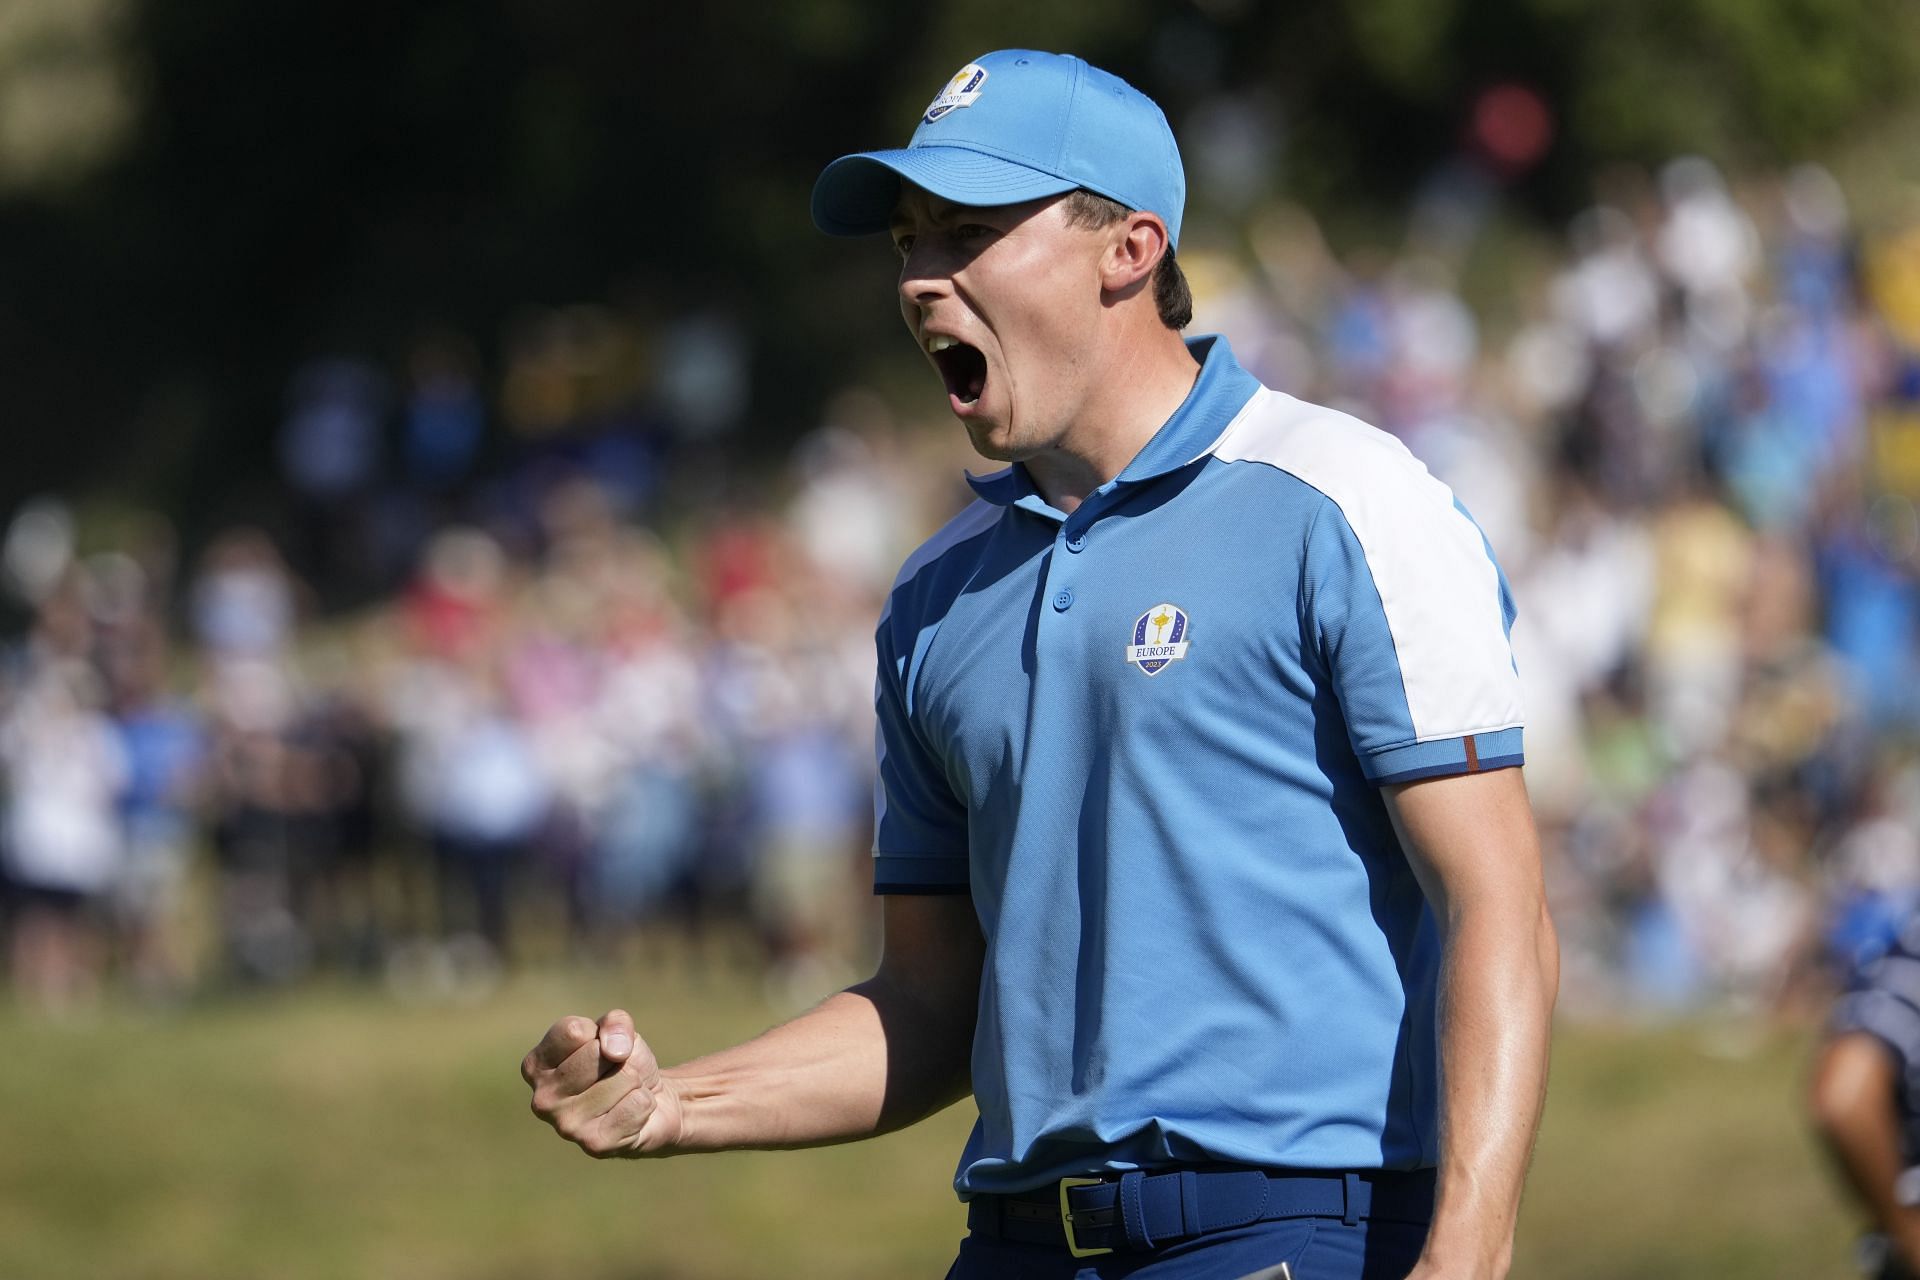 Matt Fitzpatrick celebrates during his four-ball match at the Ryder Cup 2023